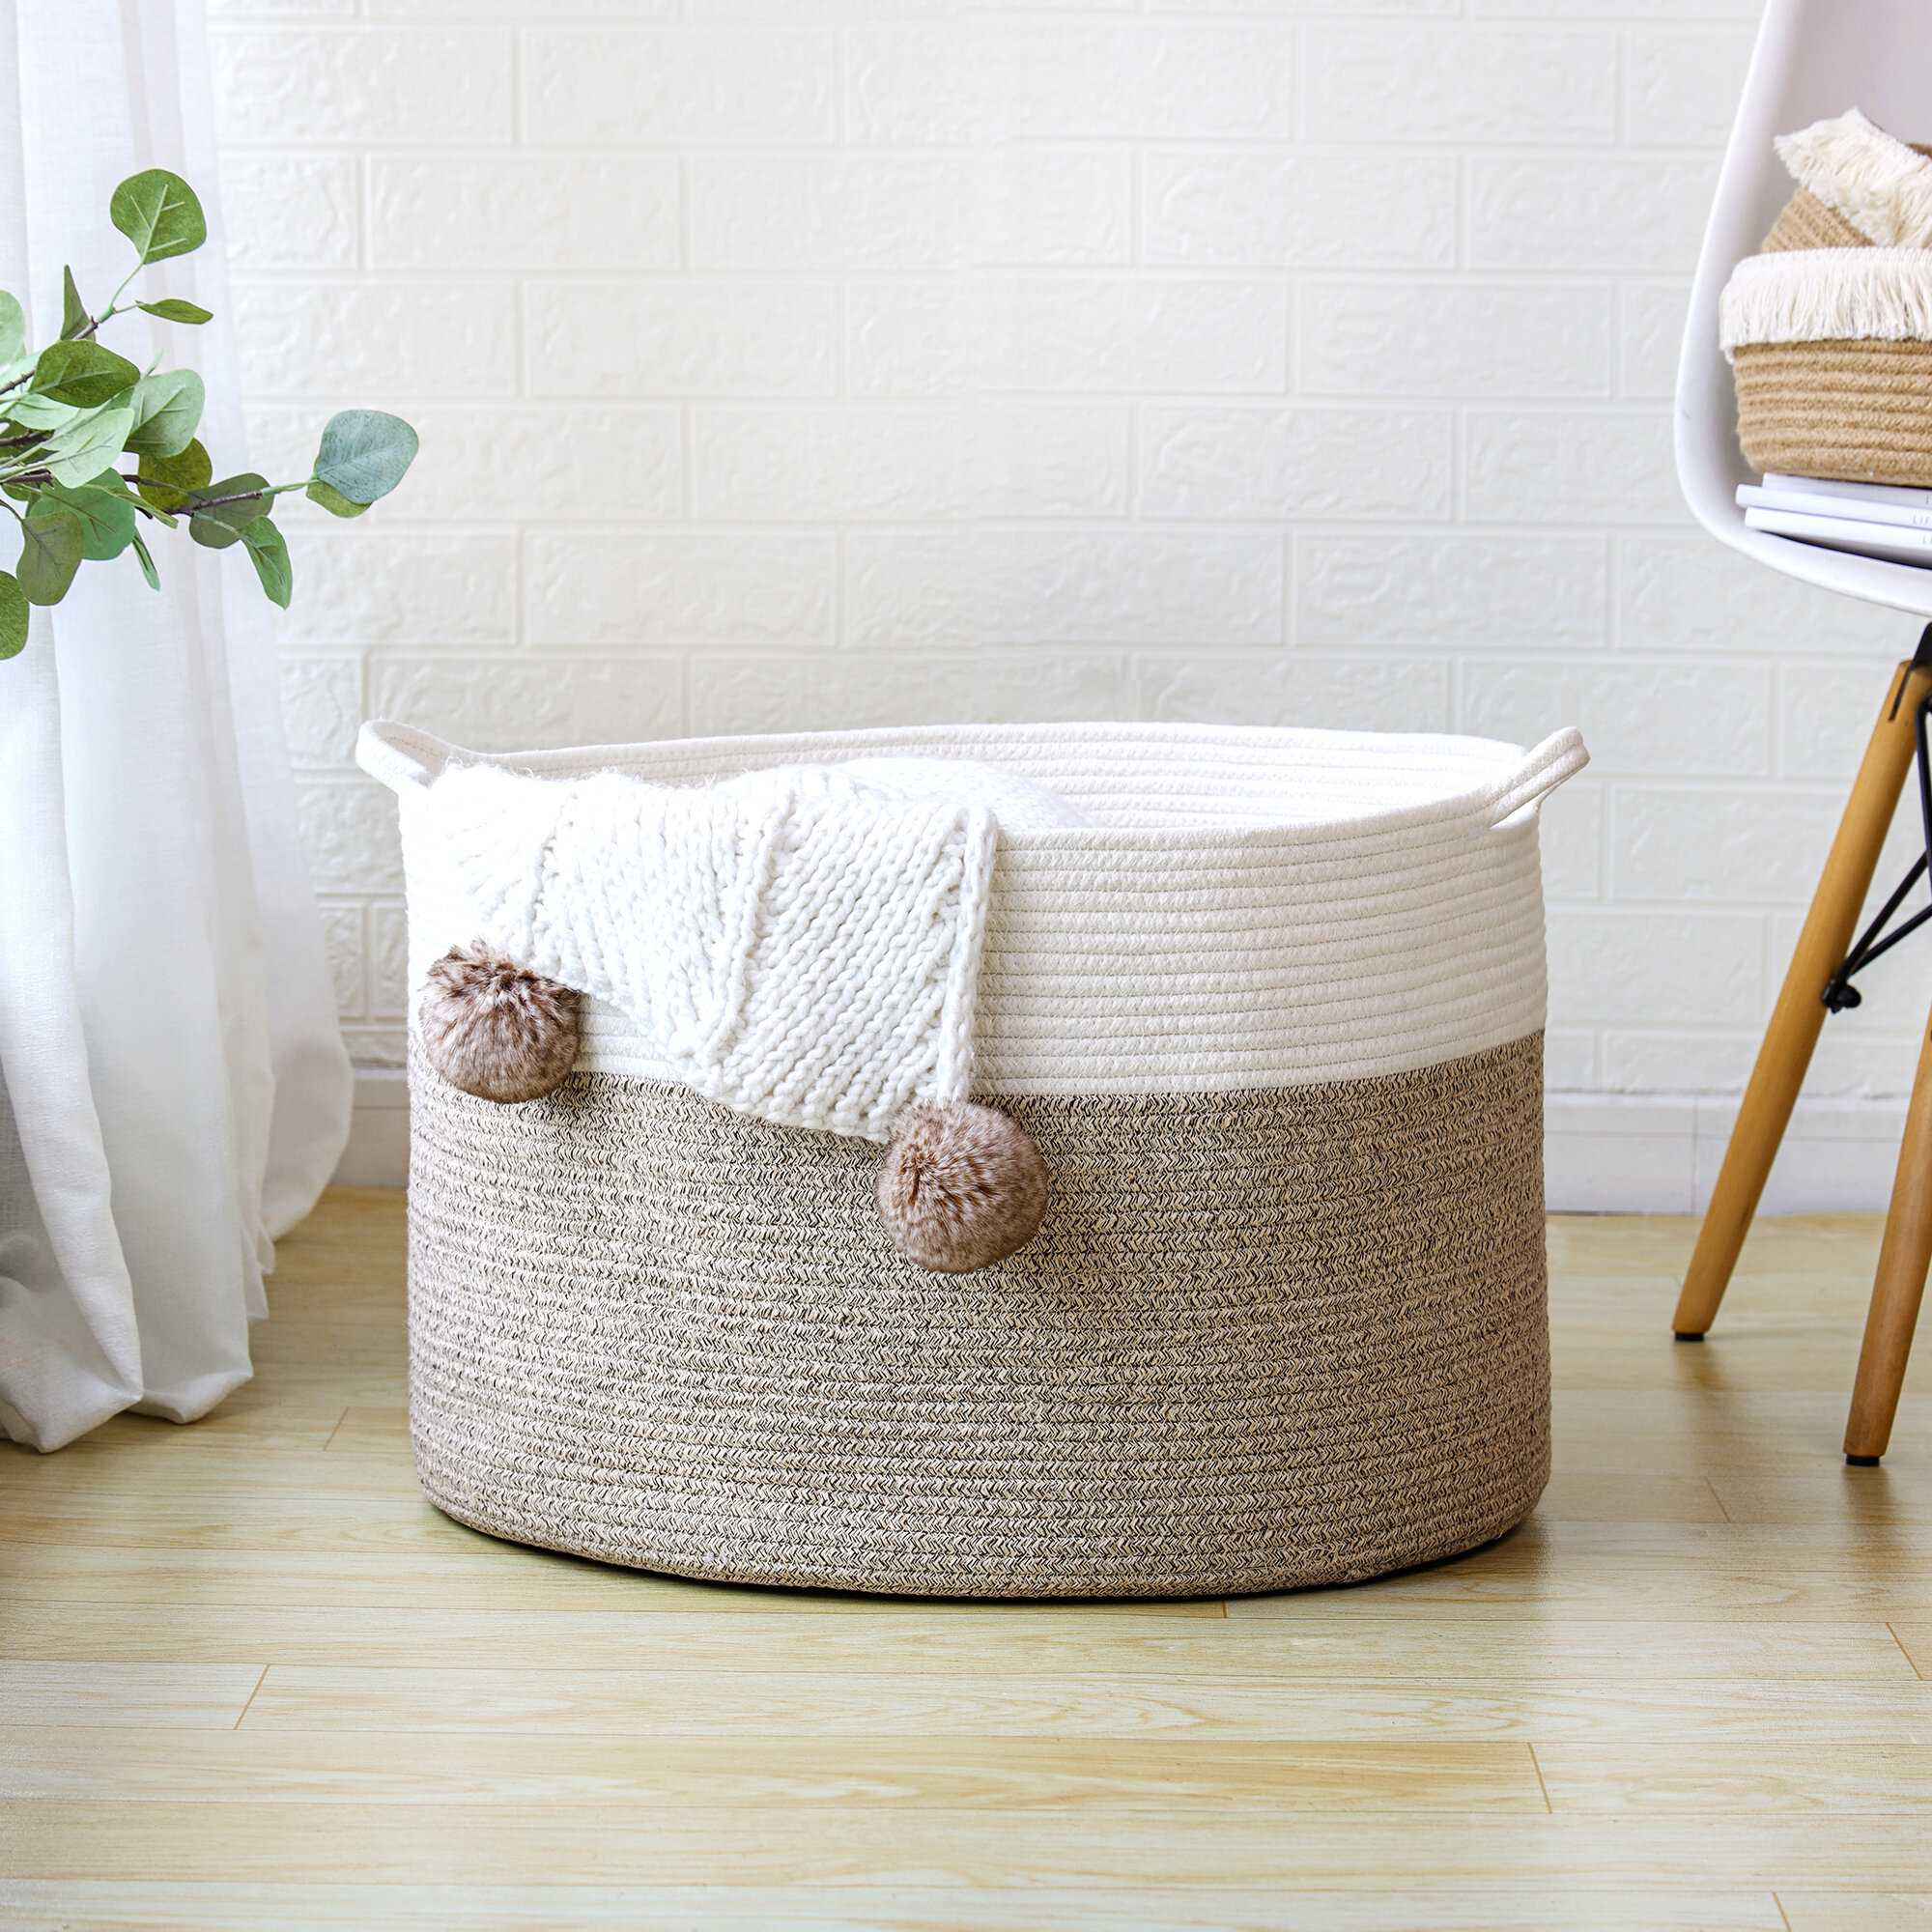 Cotton Rope Basket Dovecove Color: Taupe, Size: 13.8 H x 21.8 W x 21.8 D